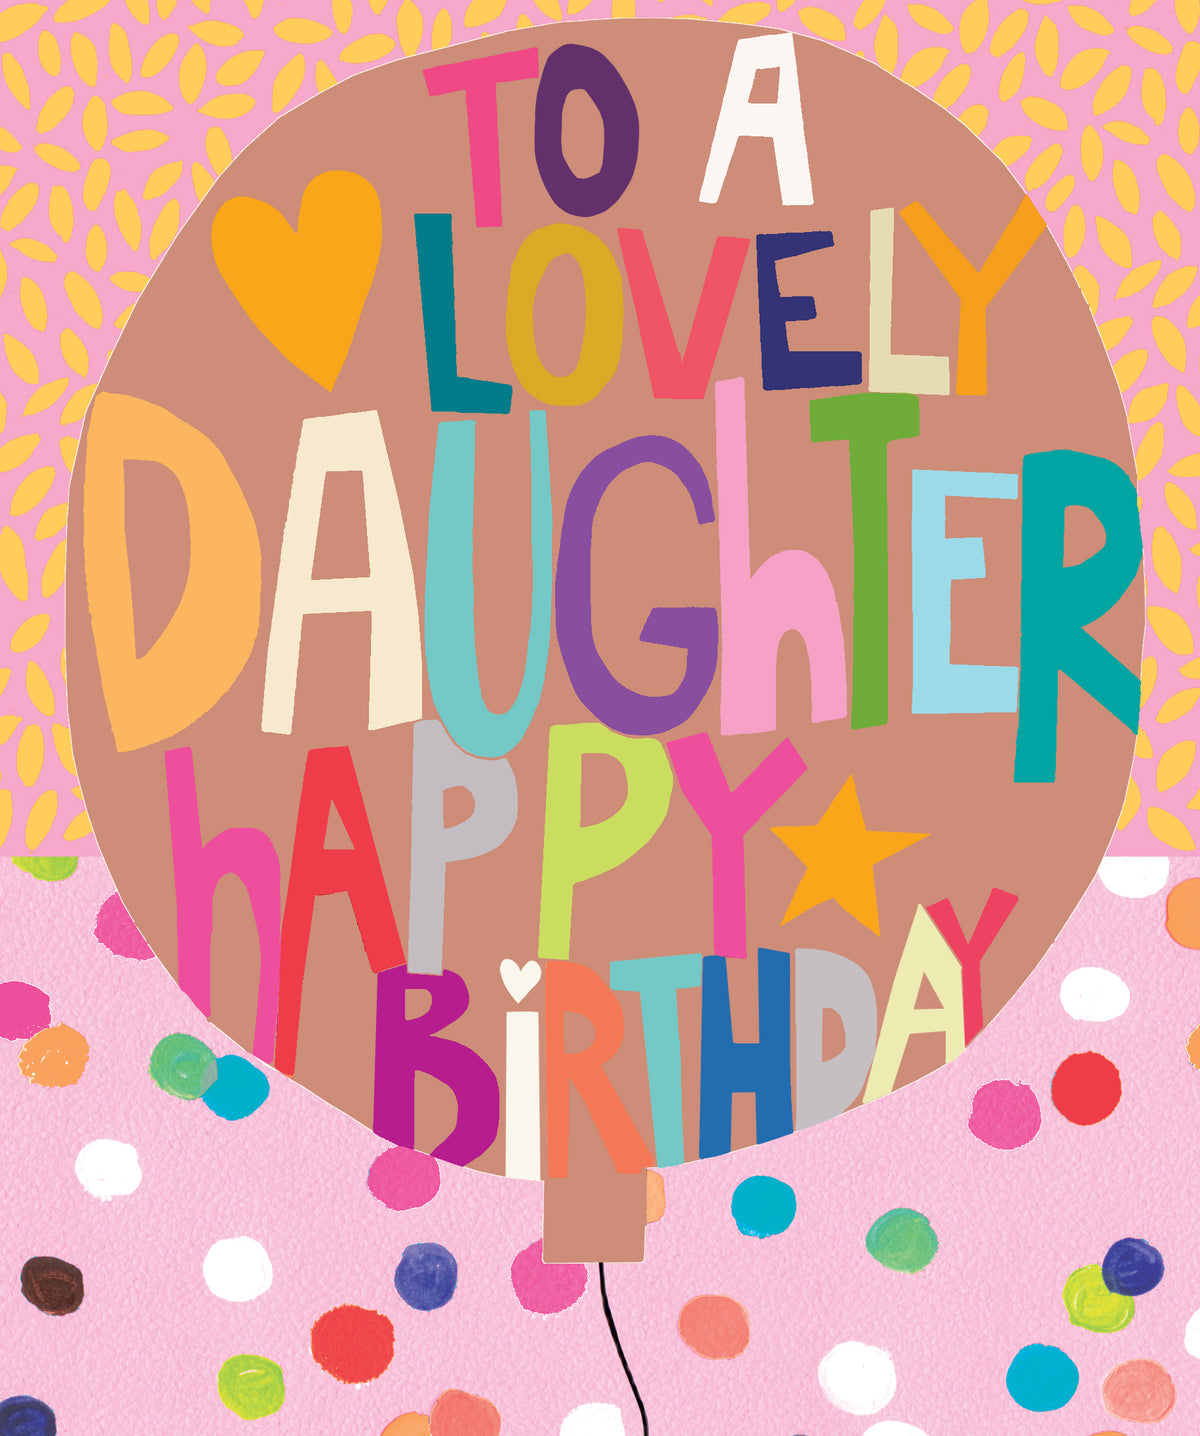 Big Balloon Lovely Daughter Paper Salad Birthday Card from Penny Black